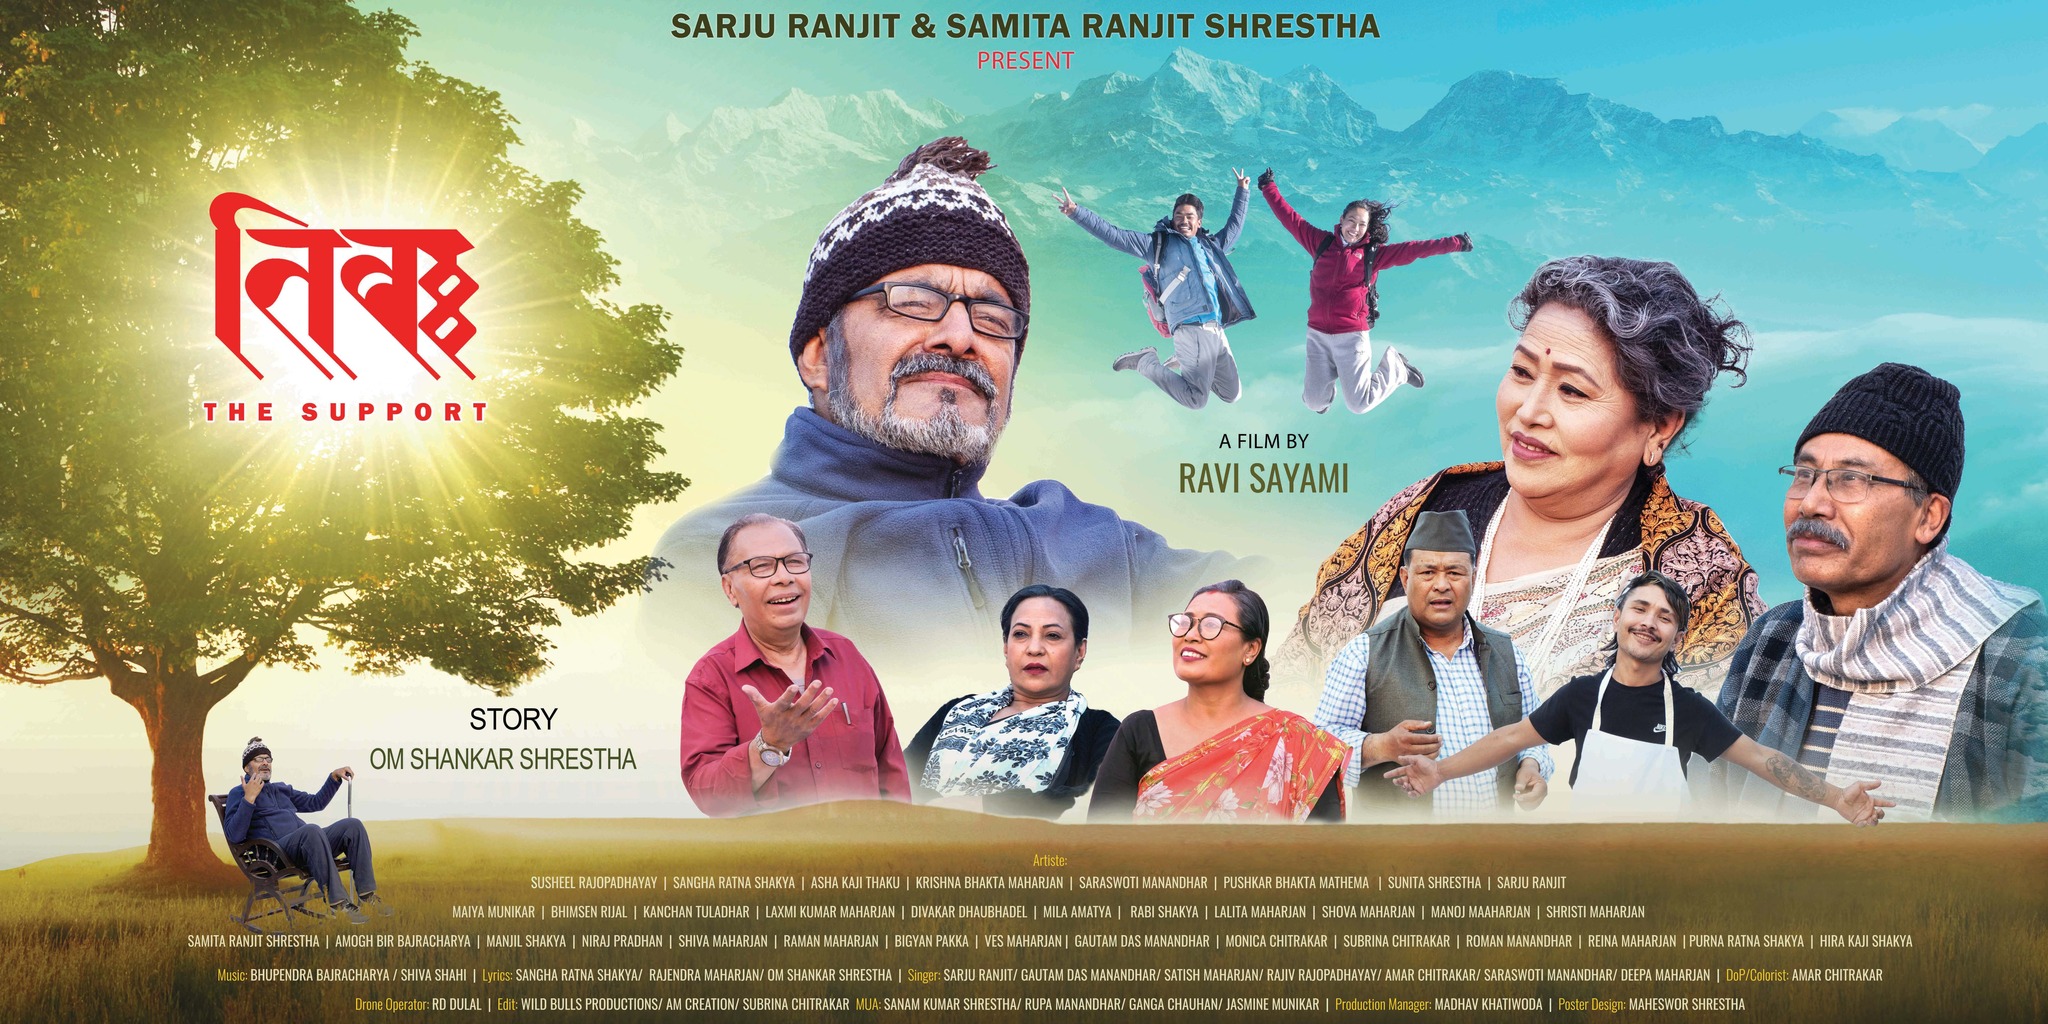 Official teaser of Newari film 'Tiba: The Support' unveiled, tackles modern Nepal society issues